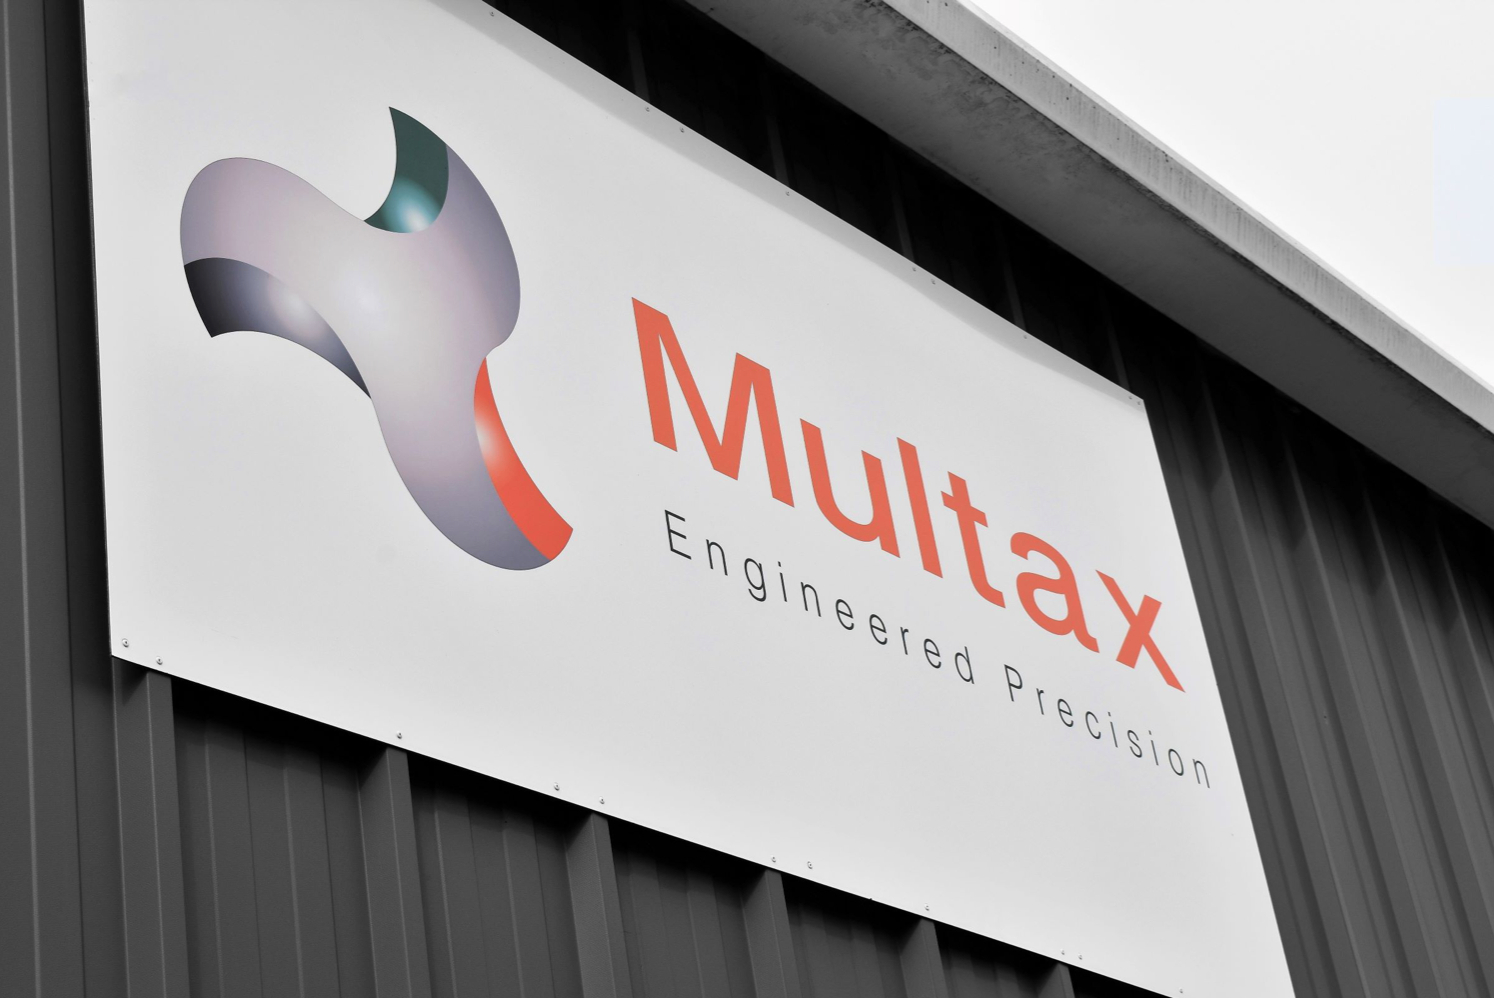 A sign on a building saying Multax Engineered Precision.